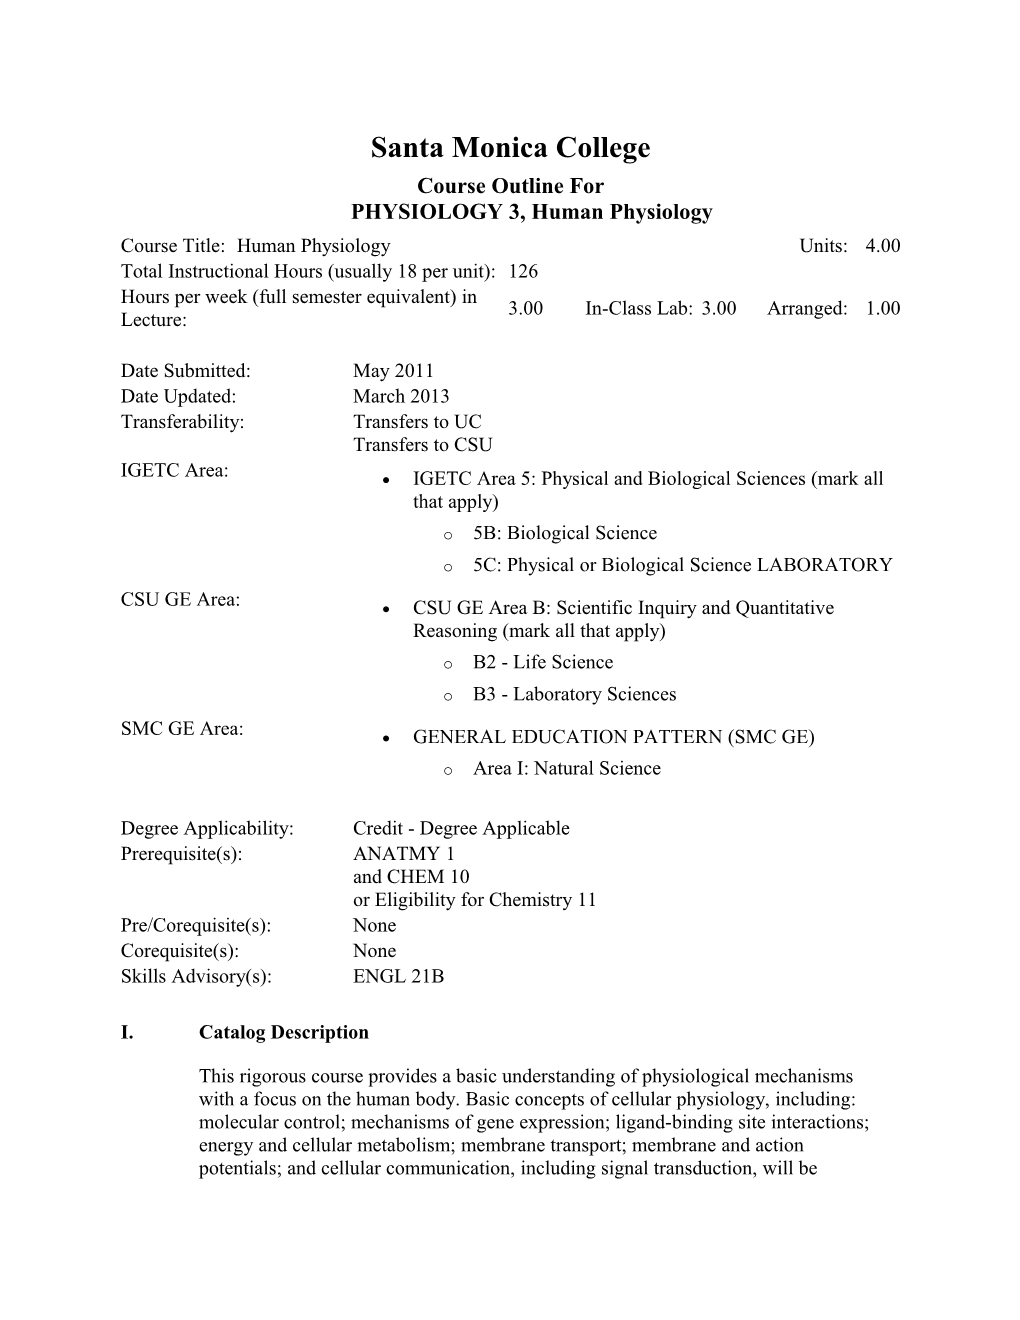 Course Outline Forphysiology 3, Human Physiology